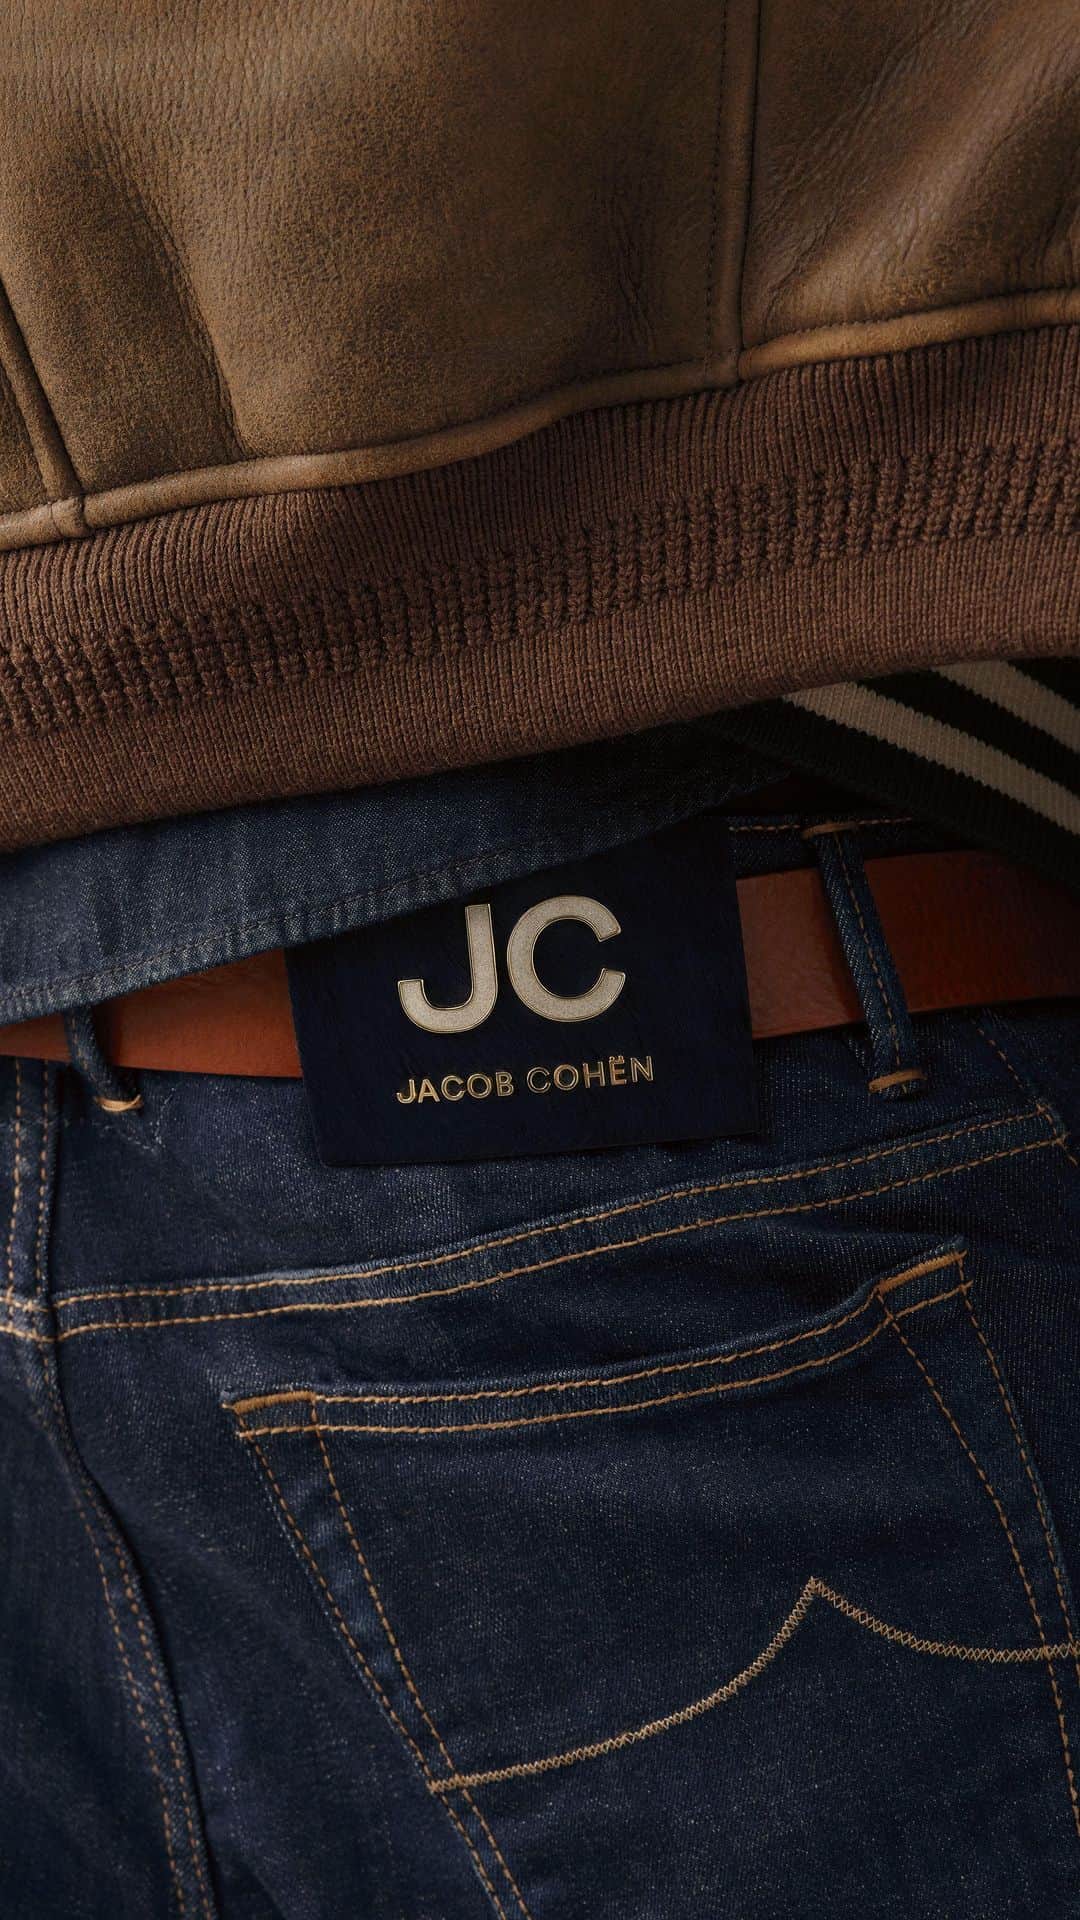 Jacob Cohenのインスタグラム：「“What really sets Jacob Cohën’s pieces apart are the finishing touches, like spicing up their shirts with patterned pockets and giving their jeans a sleek denim-on-denim color effect on the back pockets.” JACOB COHËN AND THE RISE OF HIGH-END DENIM is a story by Highsnobiety. Read more on highsnobiety.com」